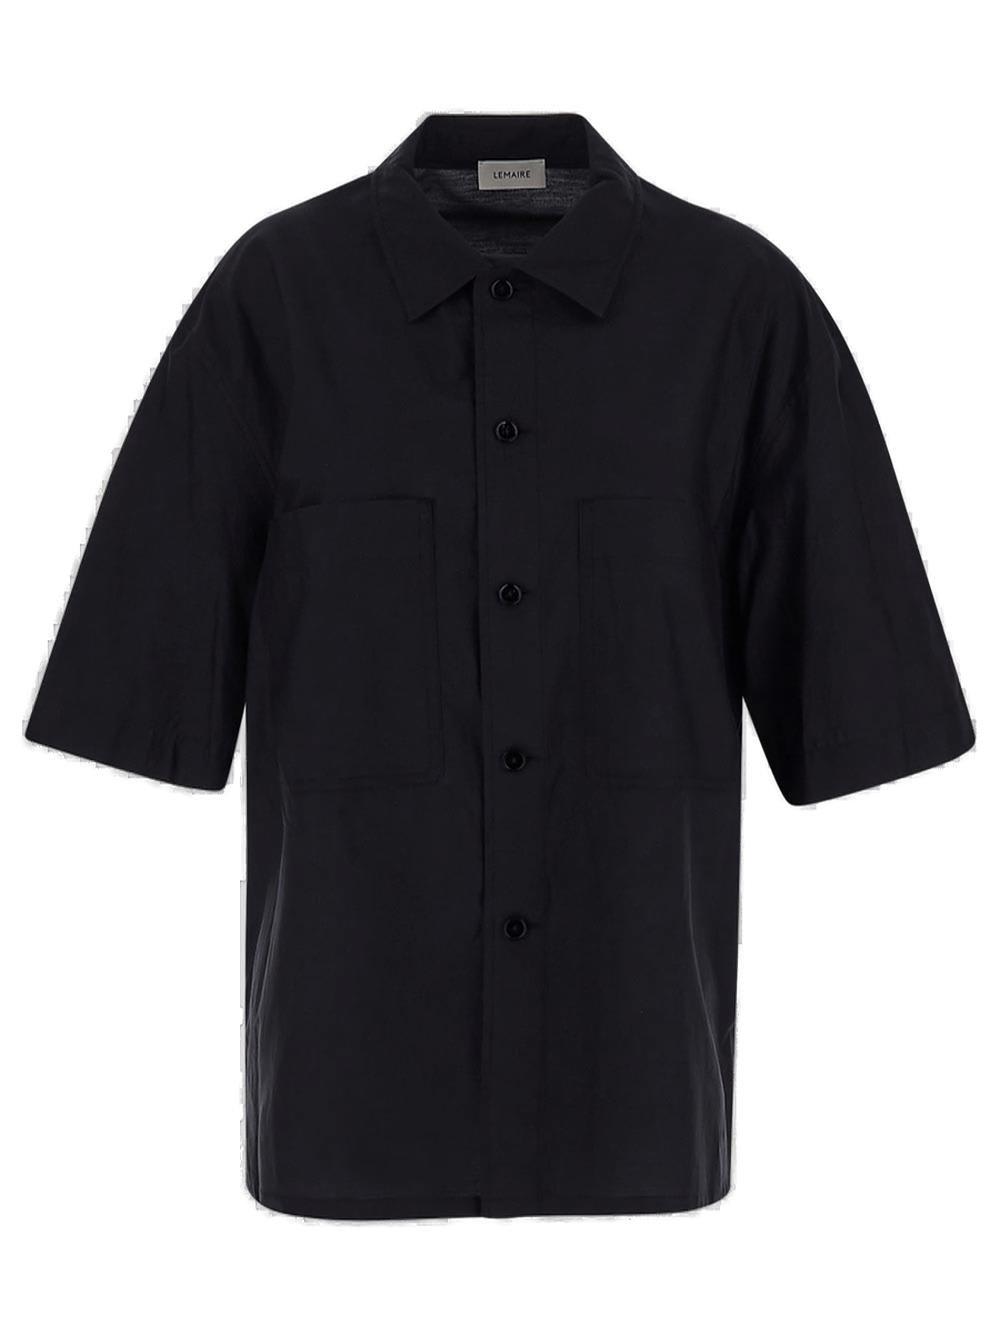 LEMAIRE SHORT-SLEEVED BUTTON-UP SHIRT